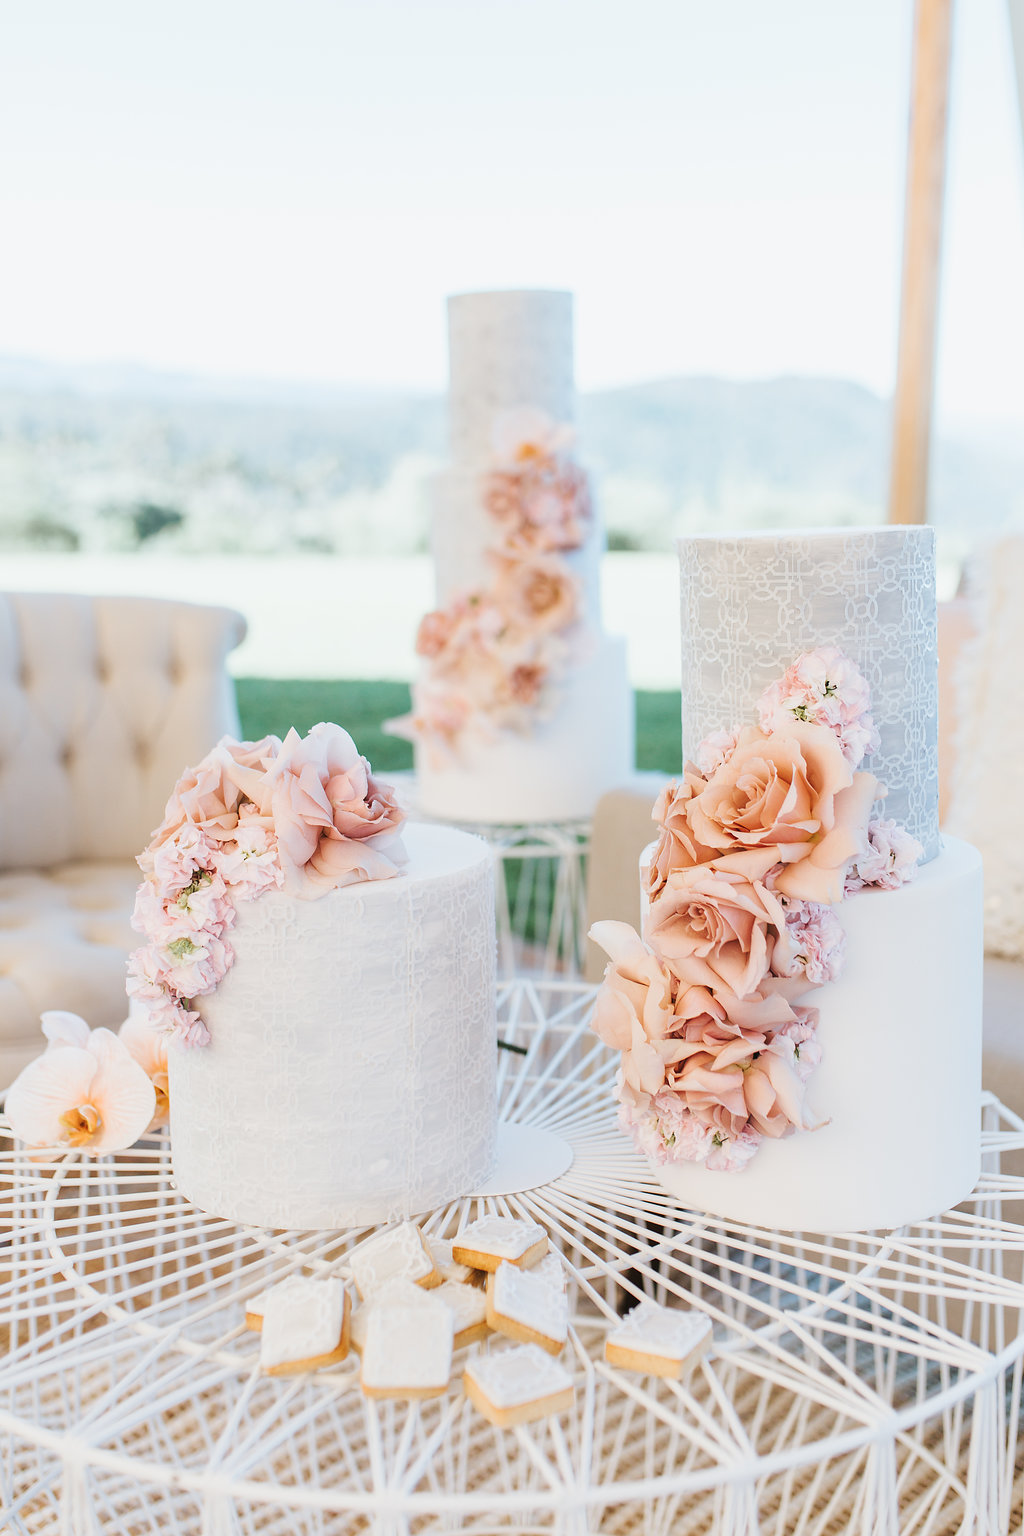 7 Ways to Make Yours a Show-stopping Wedding - Simply Style Co